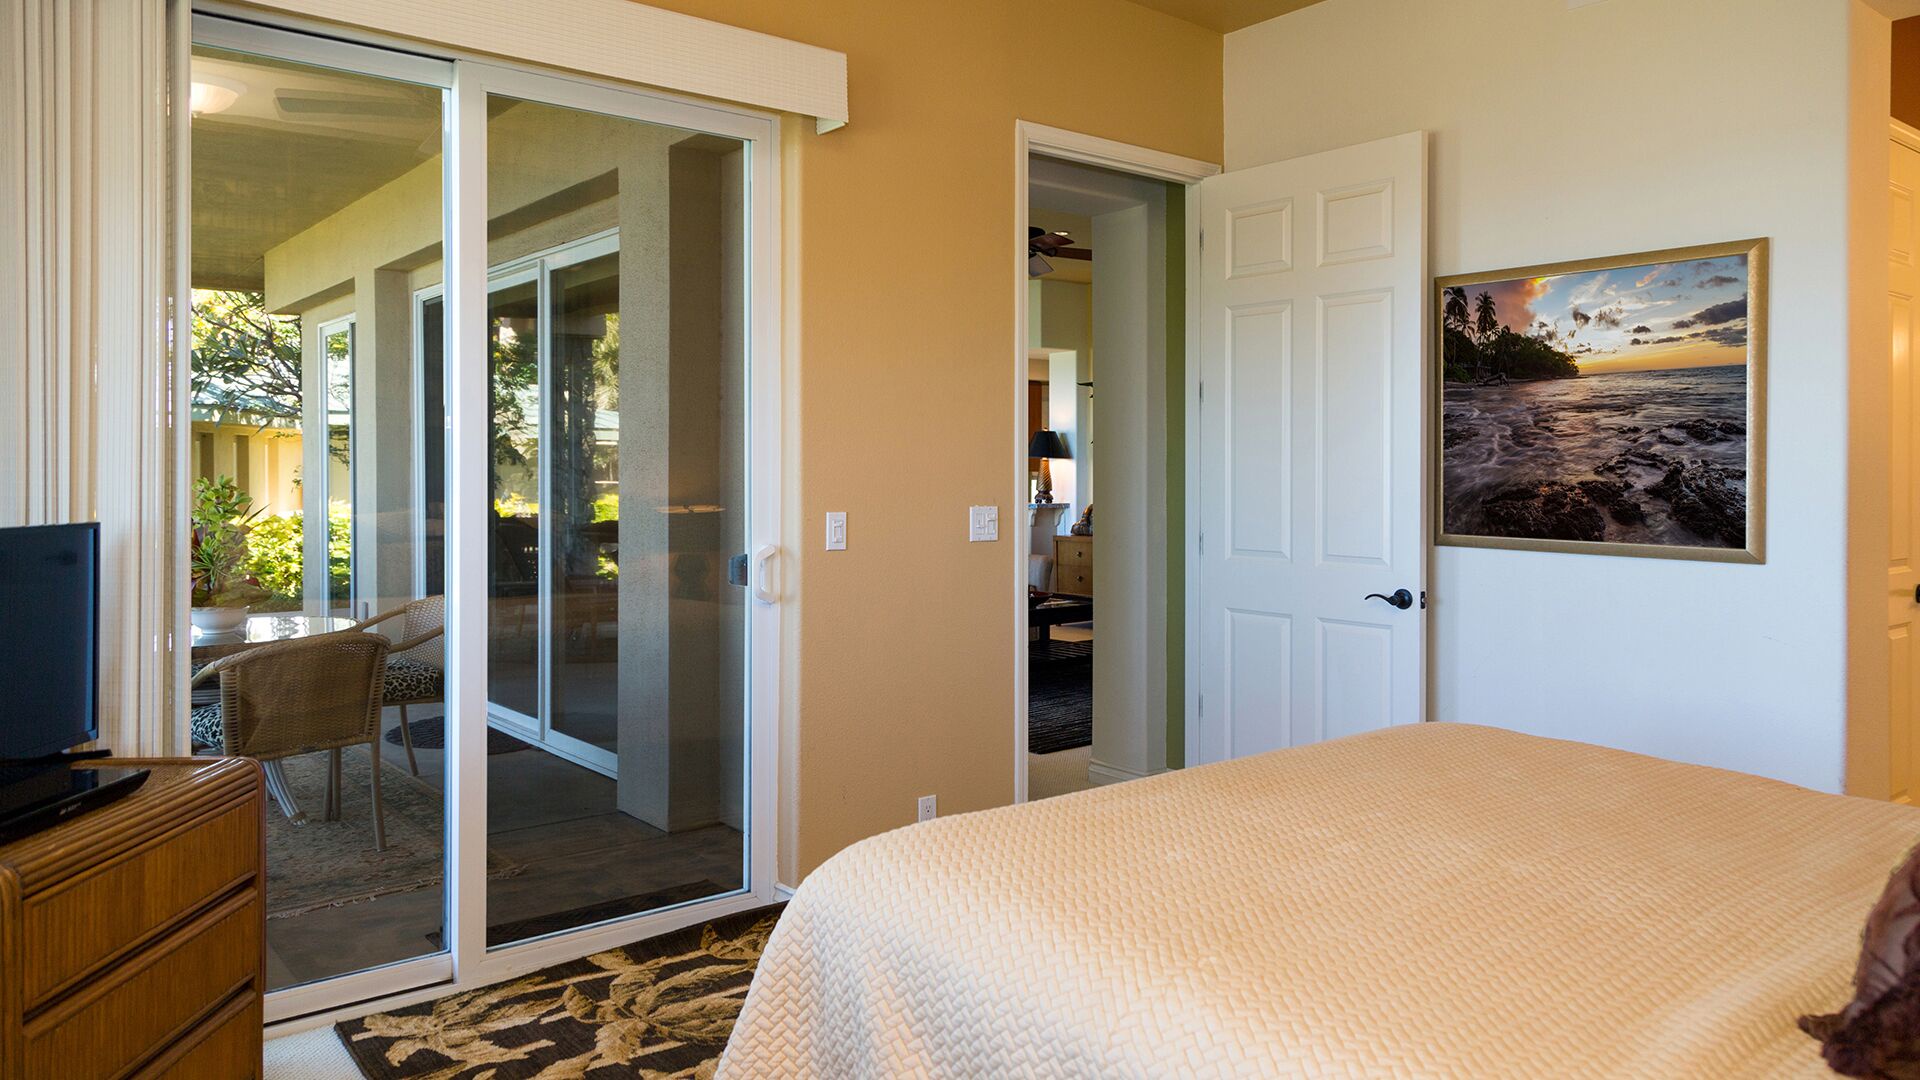 Kamuela Vacation Rentals, Kumulani I-1 - The Primary Bedroom has it's own private entrance to the lanai.